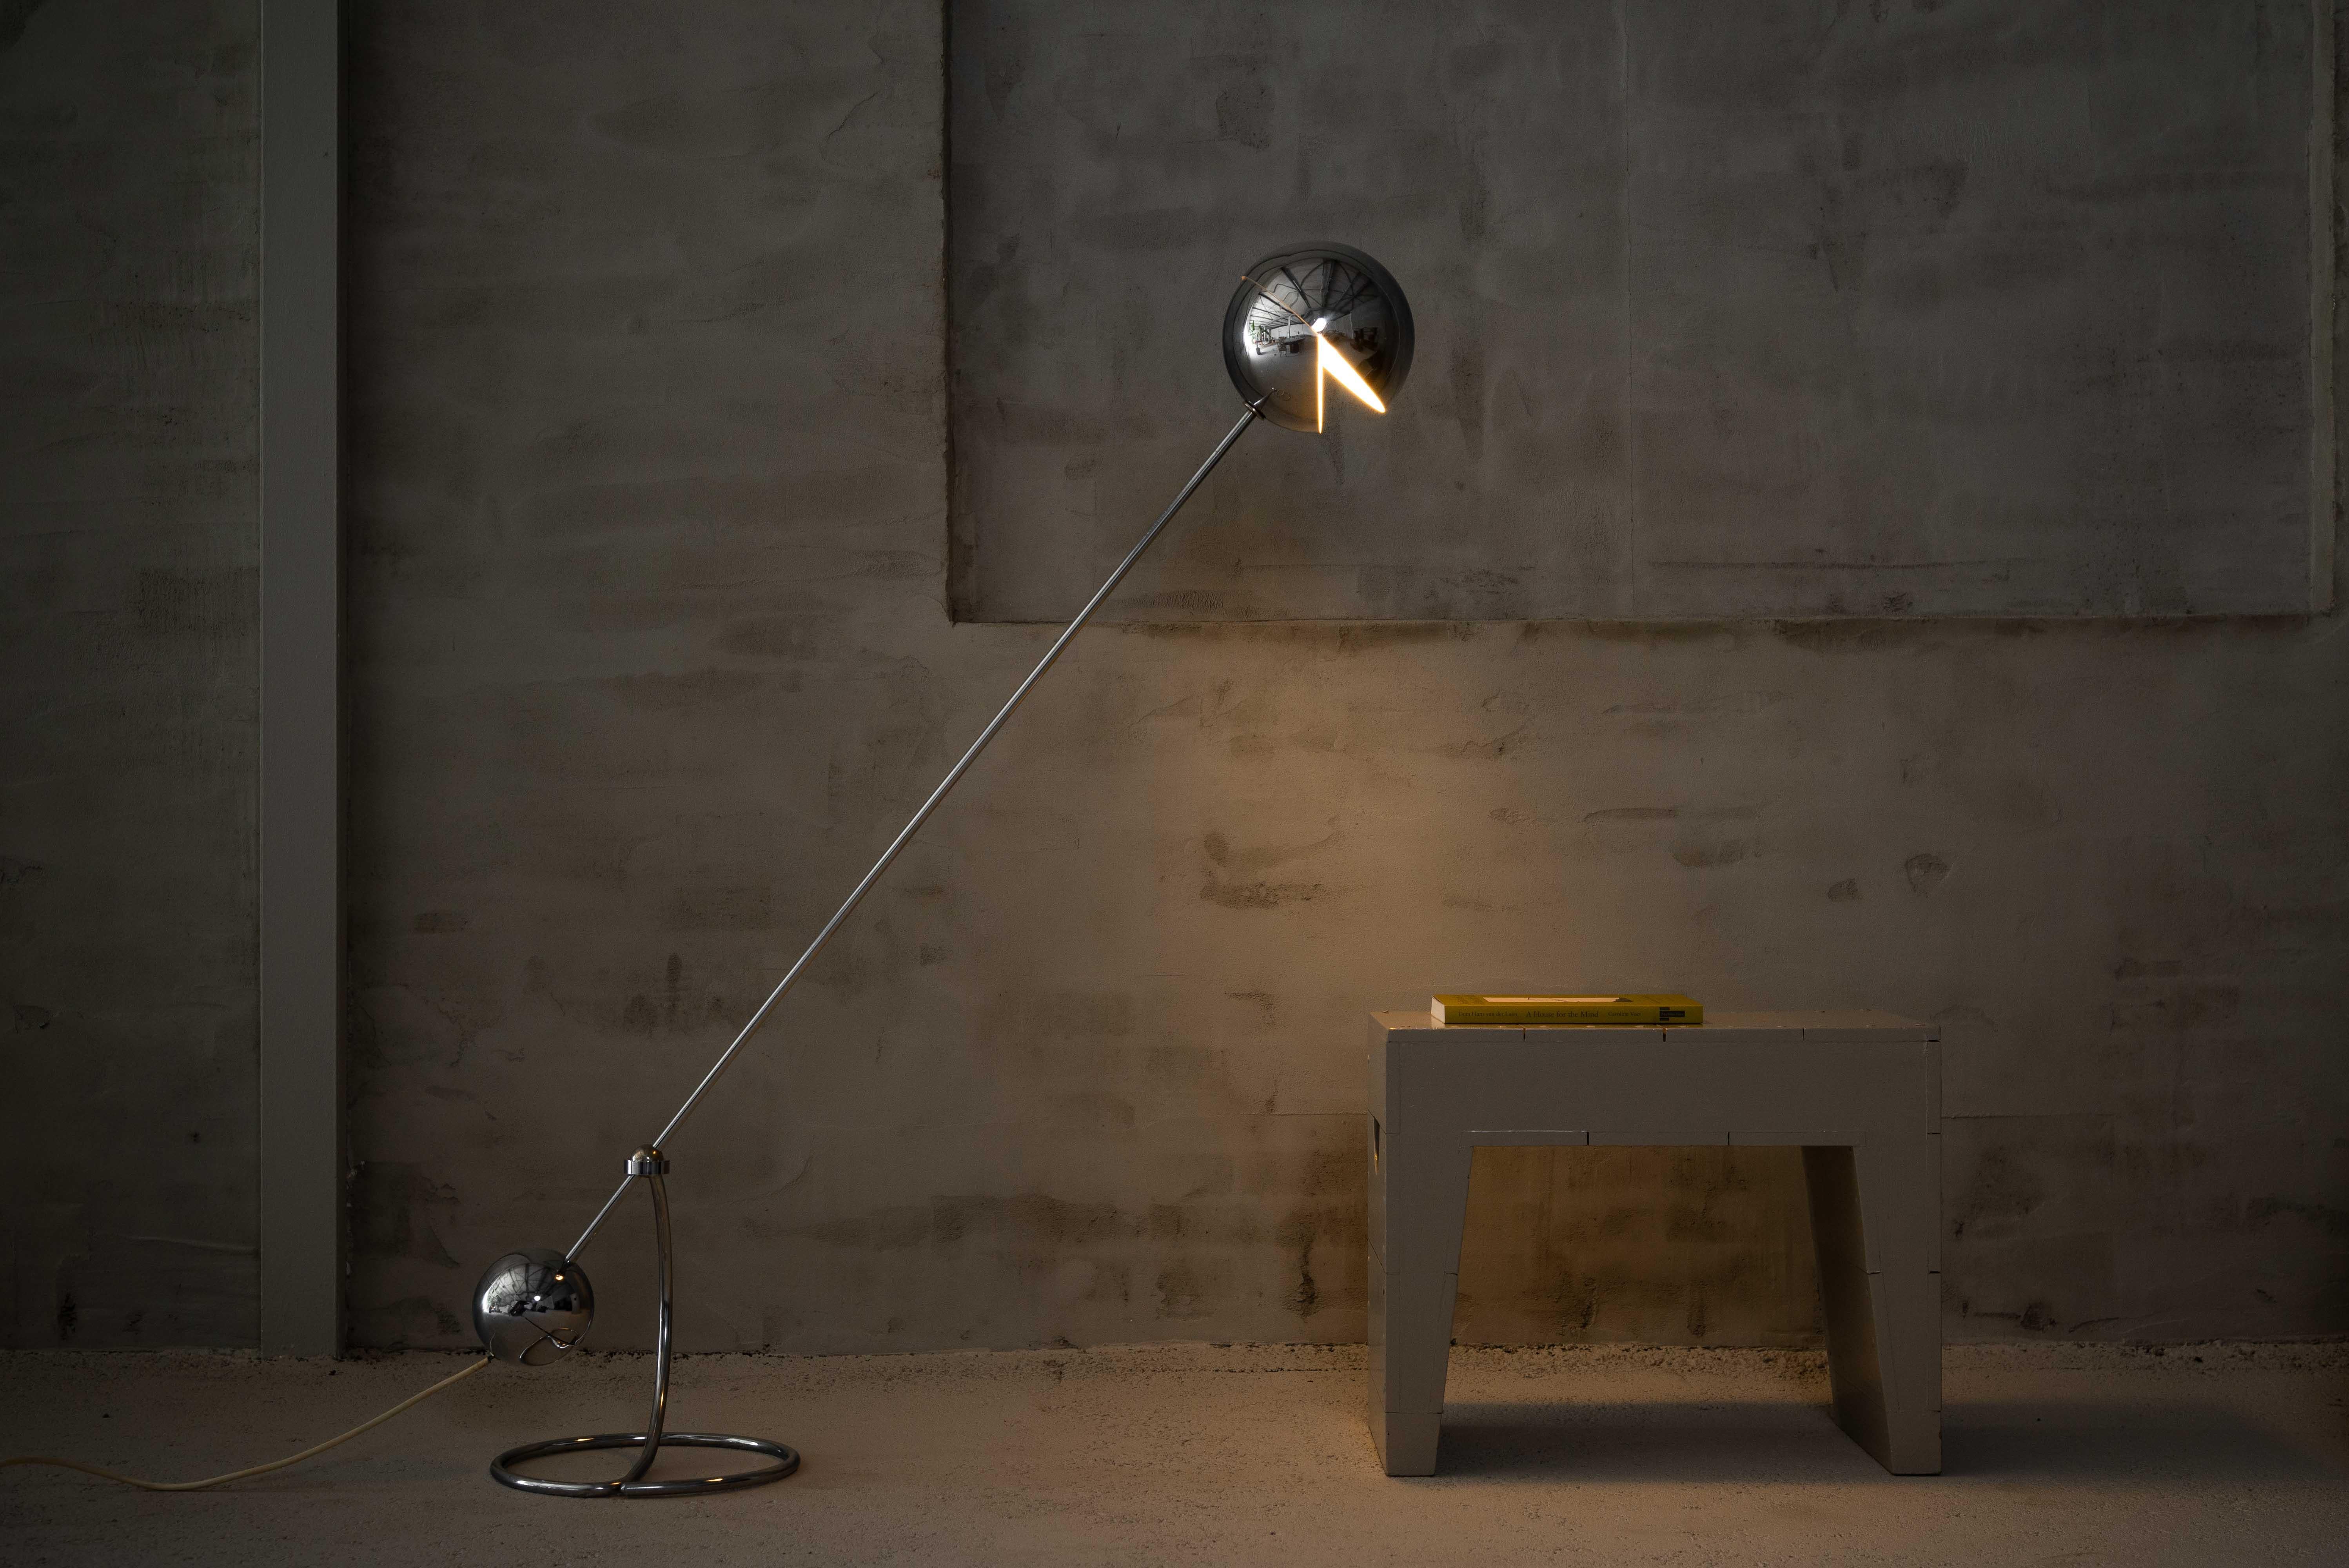 Introducing the Iconic adjustable floor lamp model S3 by Paolo Tilche for Sirrah, Italy 1972. This amazing floor lamp combines elegance and practicality in a sleek and simple design. The S3 floor lamp has a round counterweight that ensures perfect